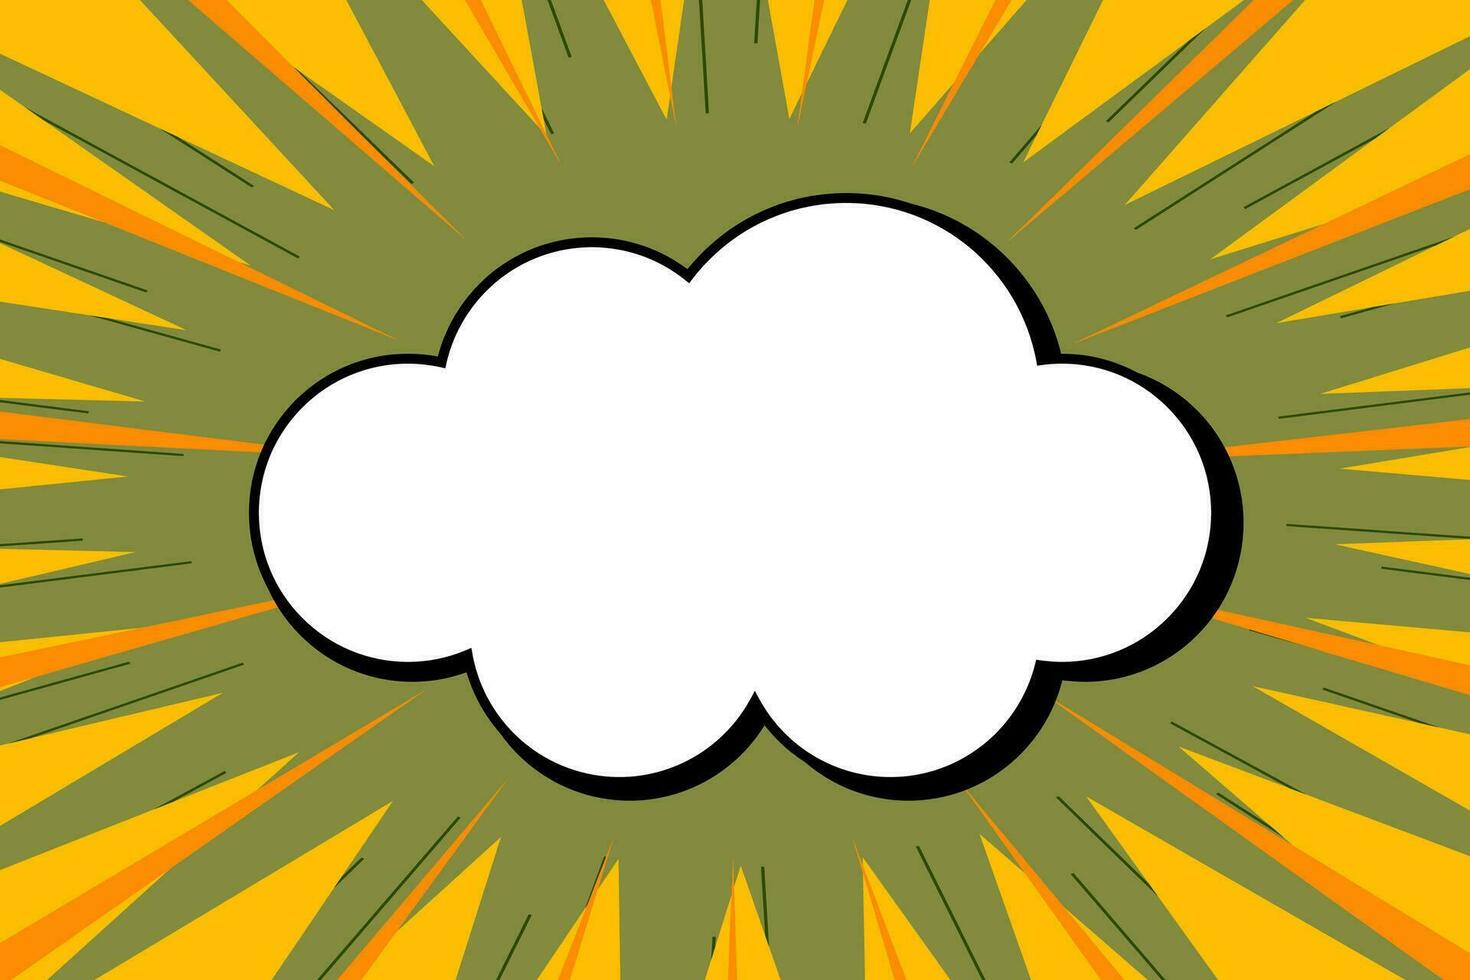 cloud puff comic style background frame vector